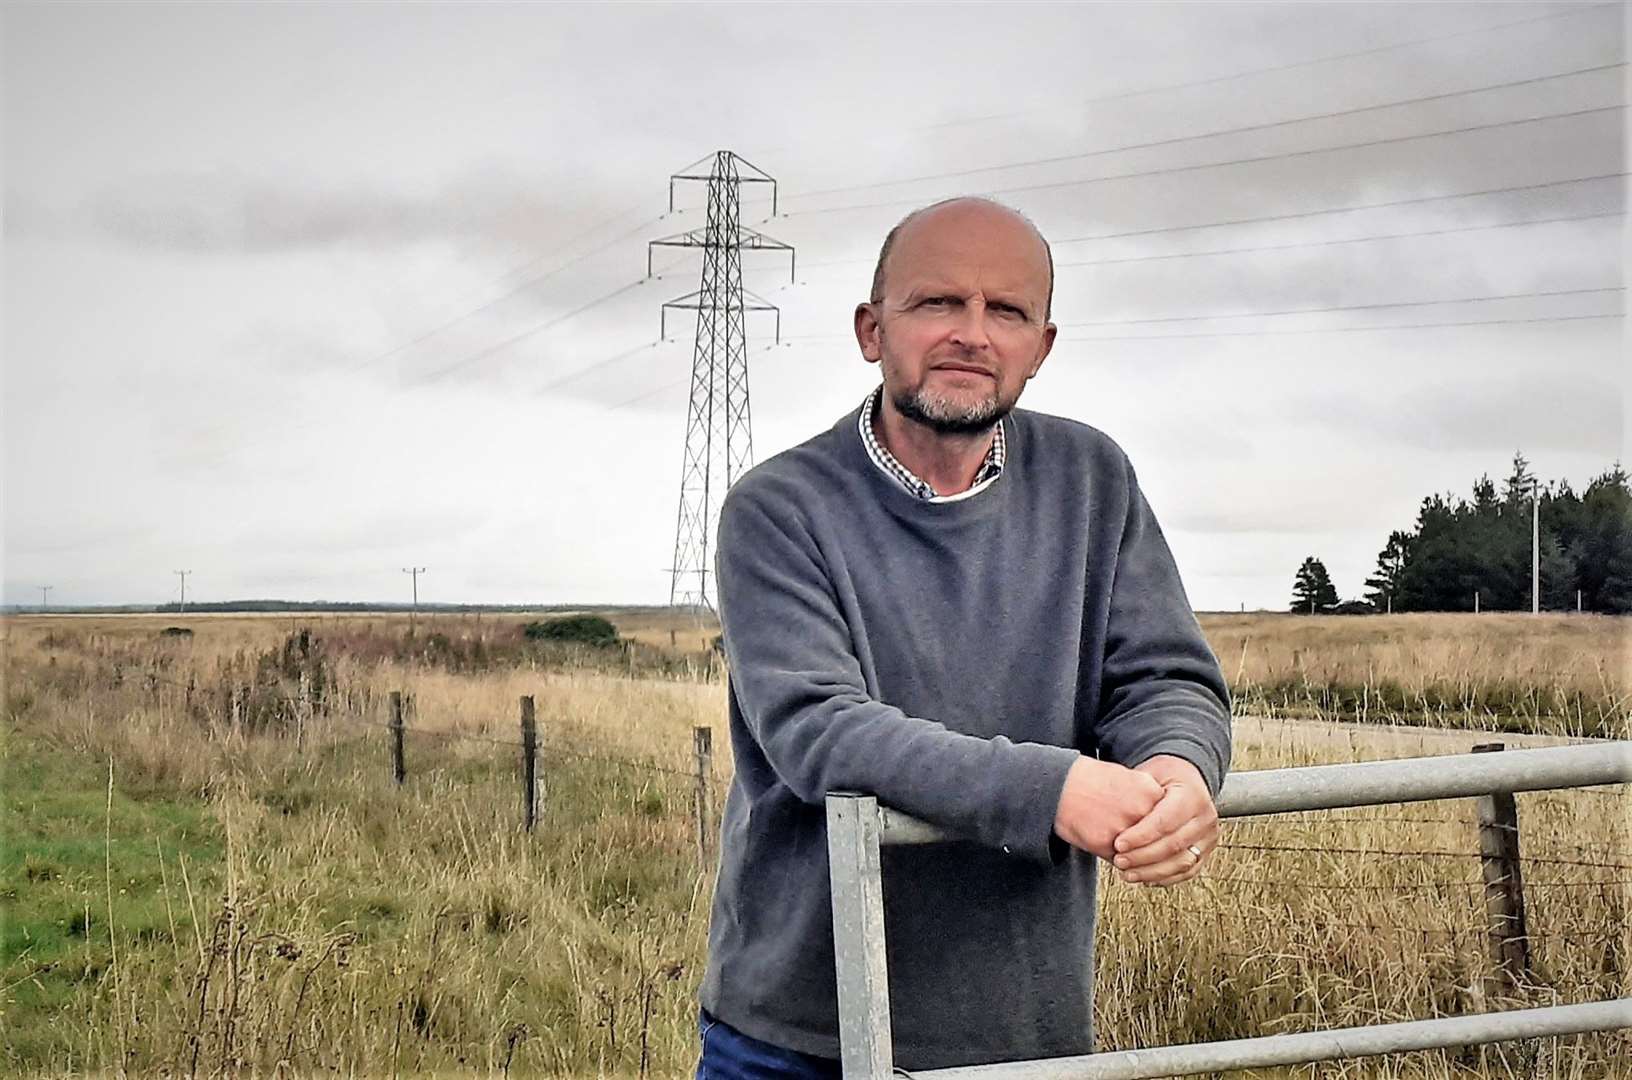 Councillor Matthew Reiss says there is still an opportunity for the Scottish Government to 'move towards a practical transition to a lower-carbon economy by building a new nuclear plant here'.